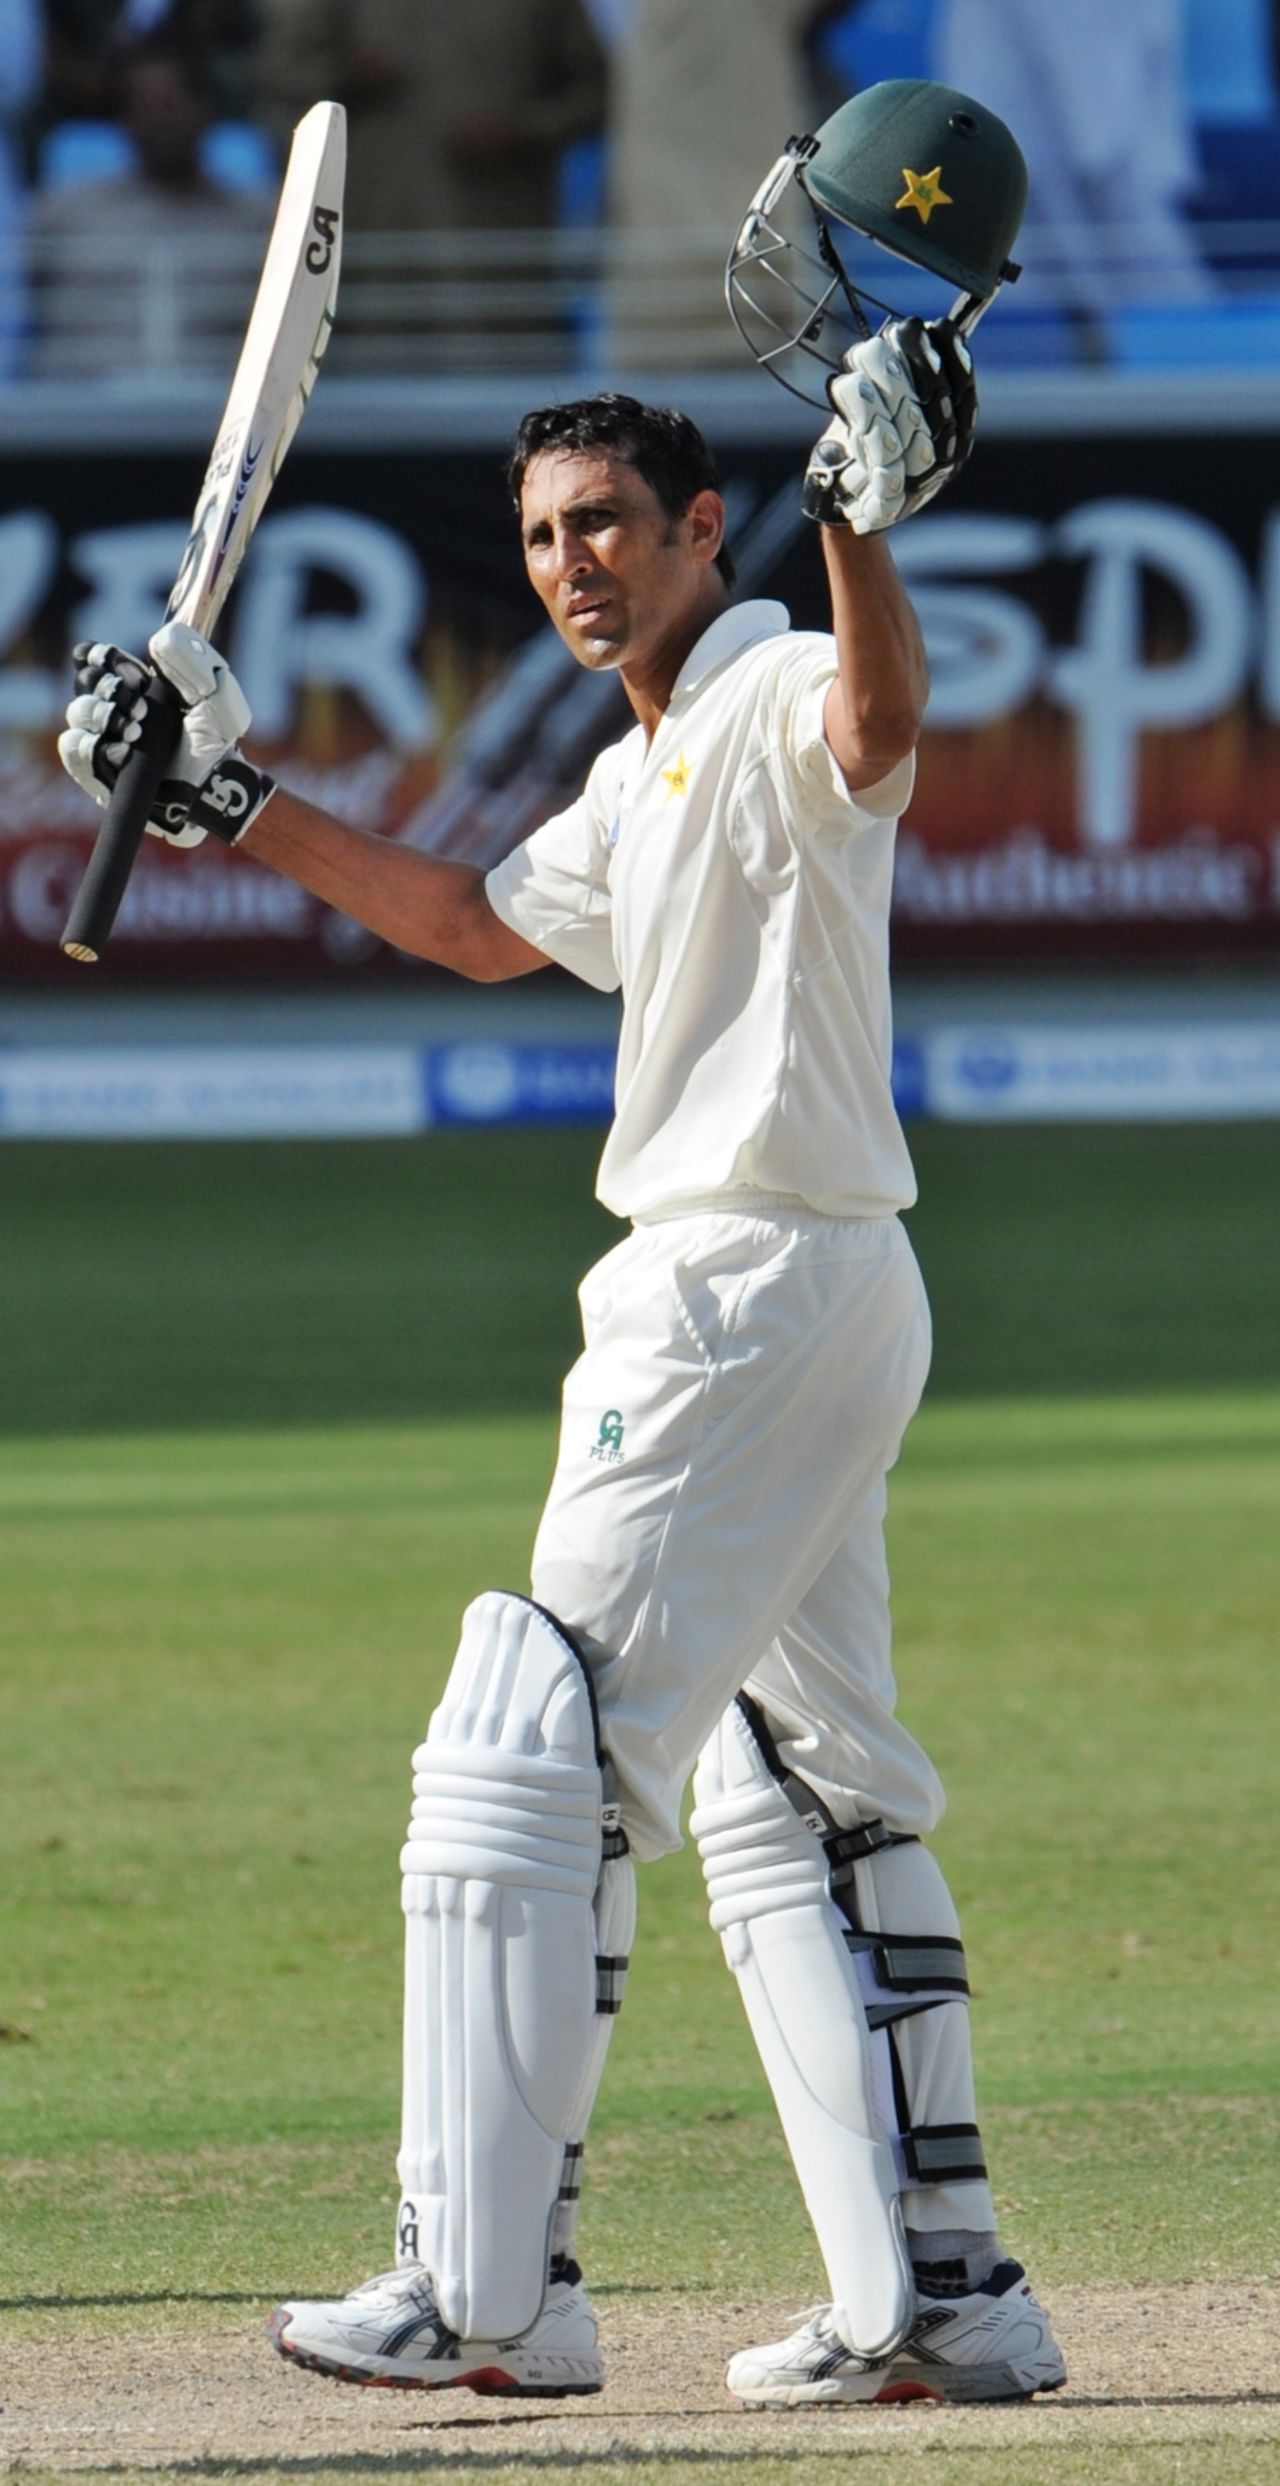 Younis Khan acknowledges applause for his century, Pakistan v South Africa, 1st Test, Dubai, November 16, 2010